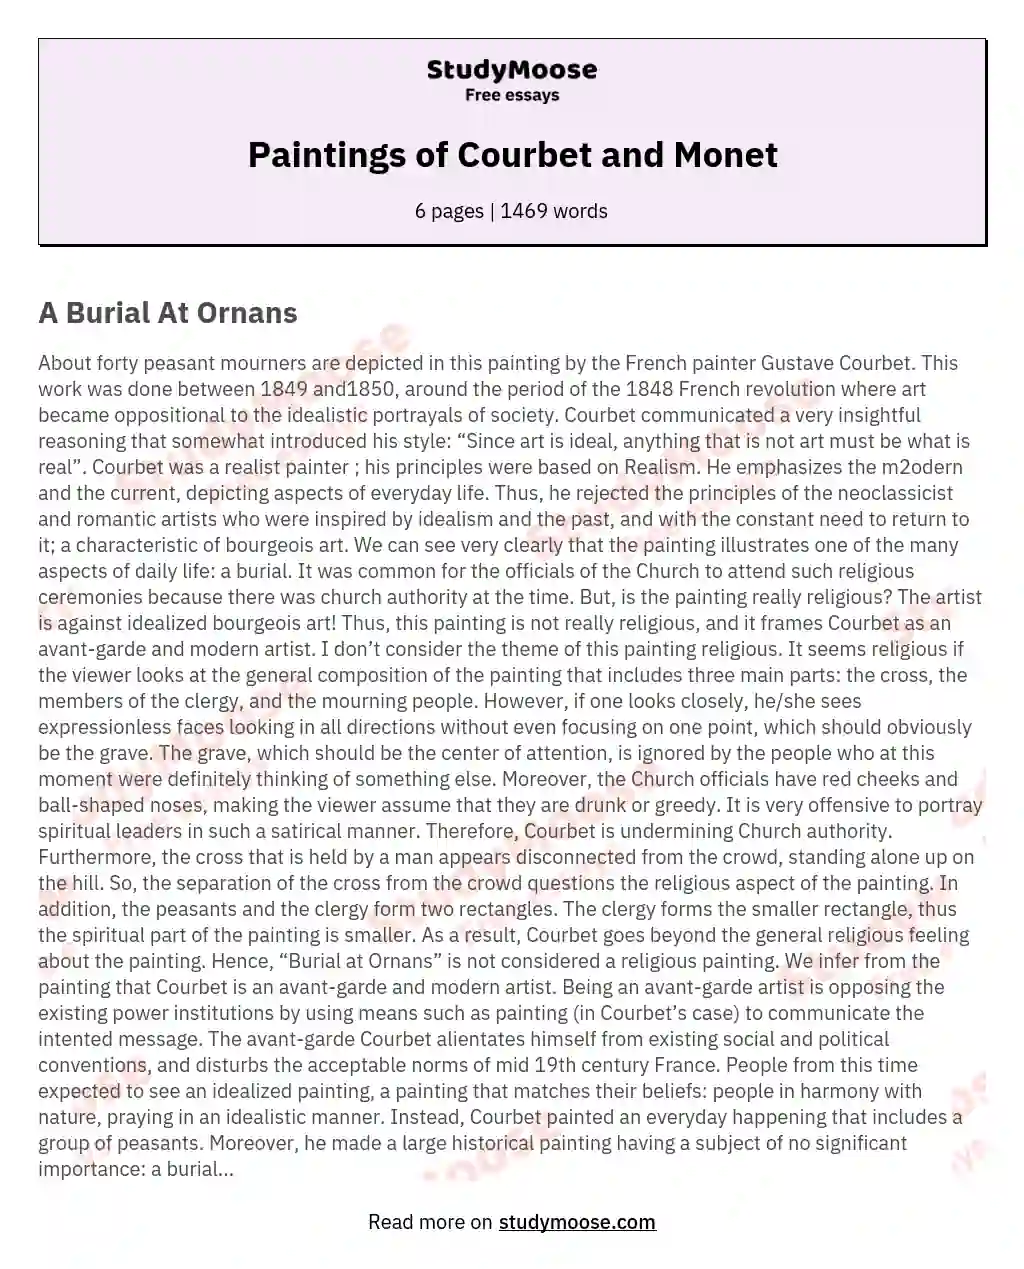 Paintings of Courbet and Monet essay